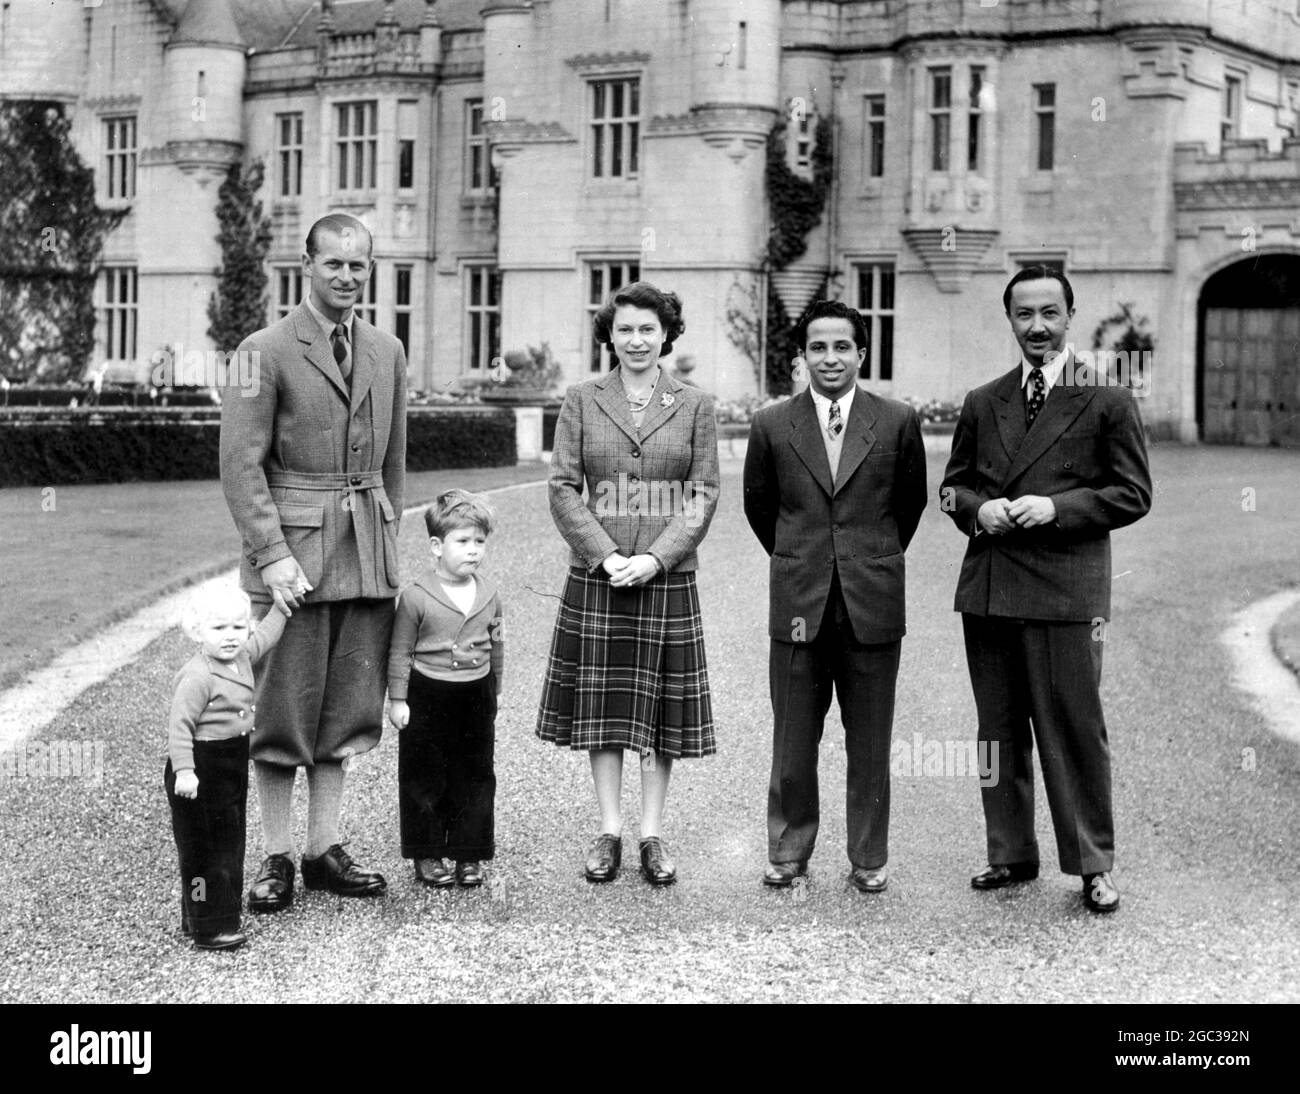 Balmoral, Scotland: The Duke of Edinburgh stands between Princess Anne and Prince Charles, as, together with Queen Elizabeth, they pose for their picture in the grounds of Balmoral Castle with 17-year old King Feisal of Iraq and his uncle, Emir Abdul Illah, the Prince Regent. The boy-King, an ex-Harrow schoolboy, is the guest of the Queen and Duke at Balmoral, their country home in Scotland. 26 September 1952 Stock Photo